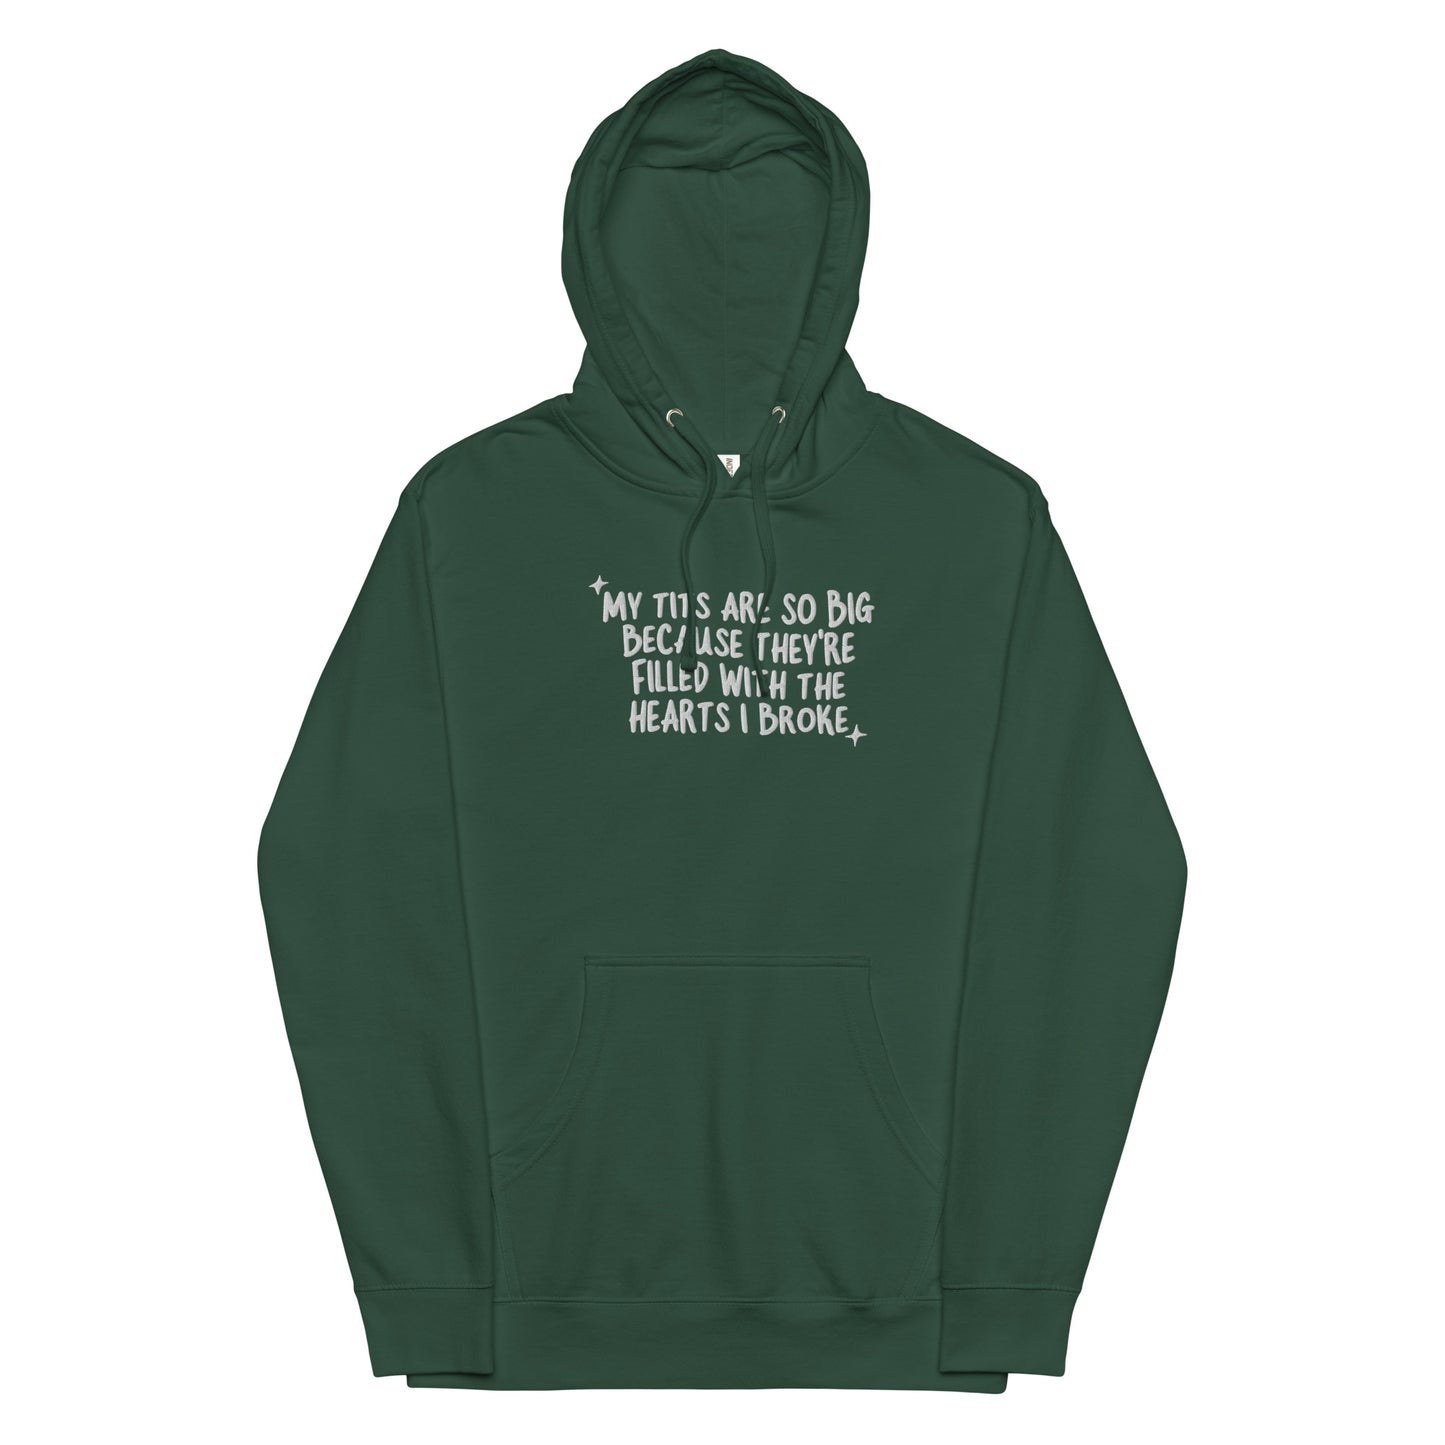 My Tits Are So Big (Hearts I Broke) Embroidered Unisex hoodie